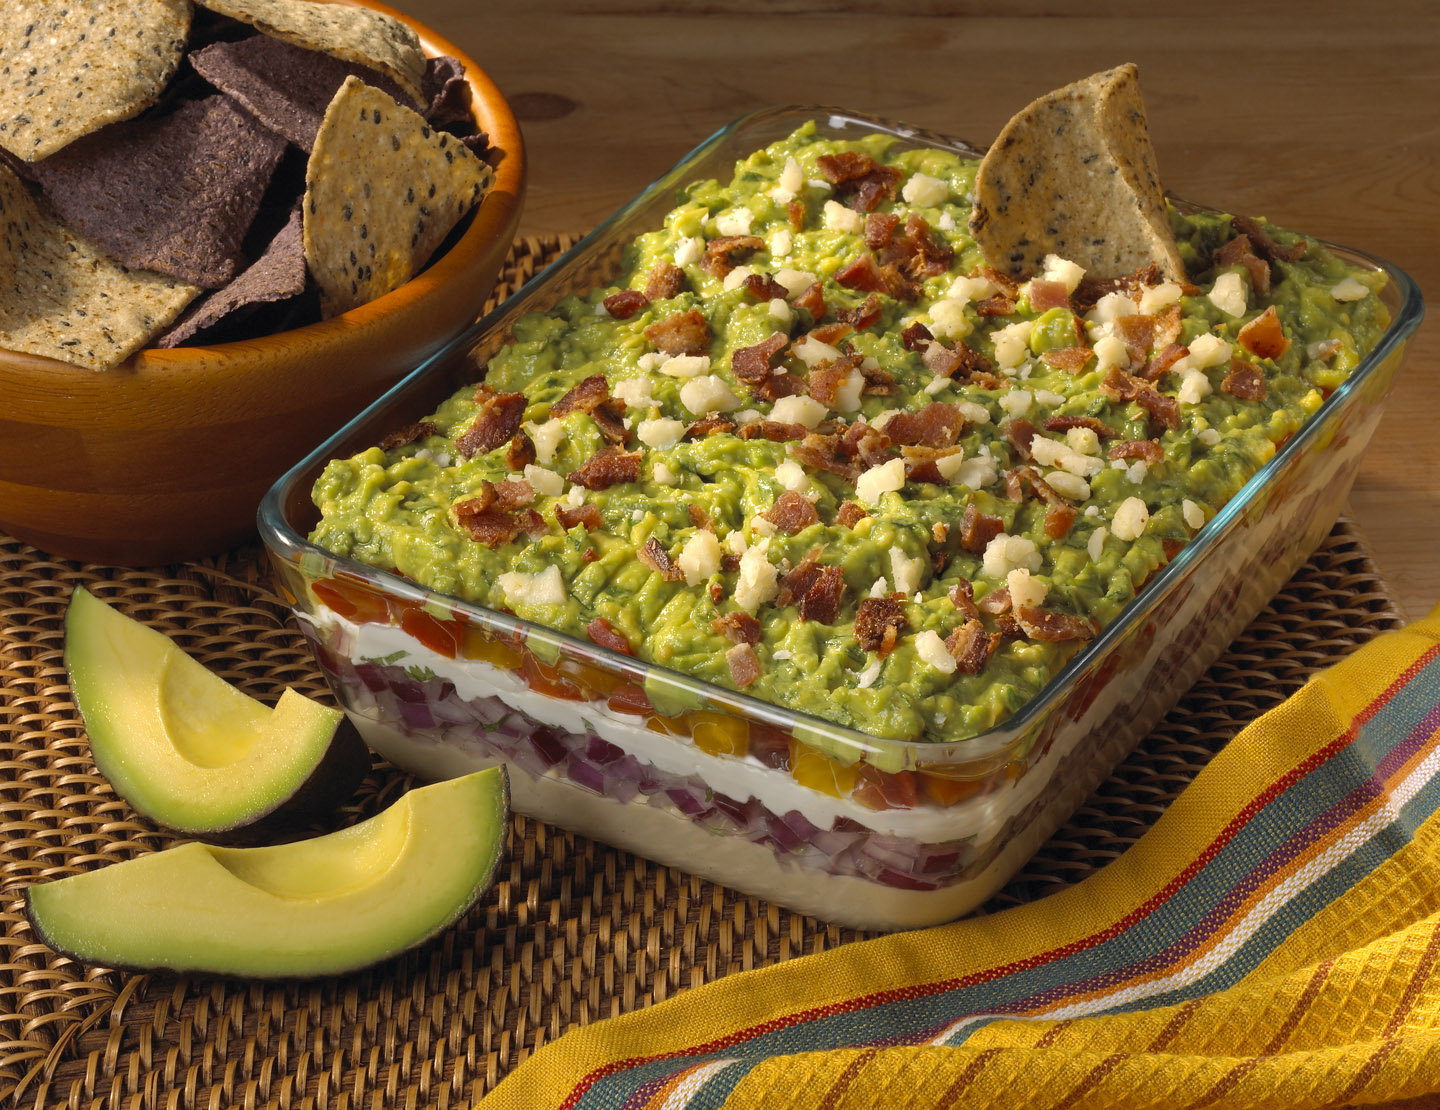 Layered Guacamole Dip with a New Twist, From the Kitchen of Rick ...